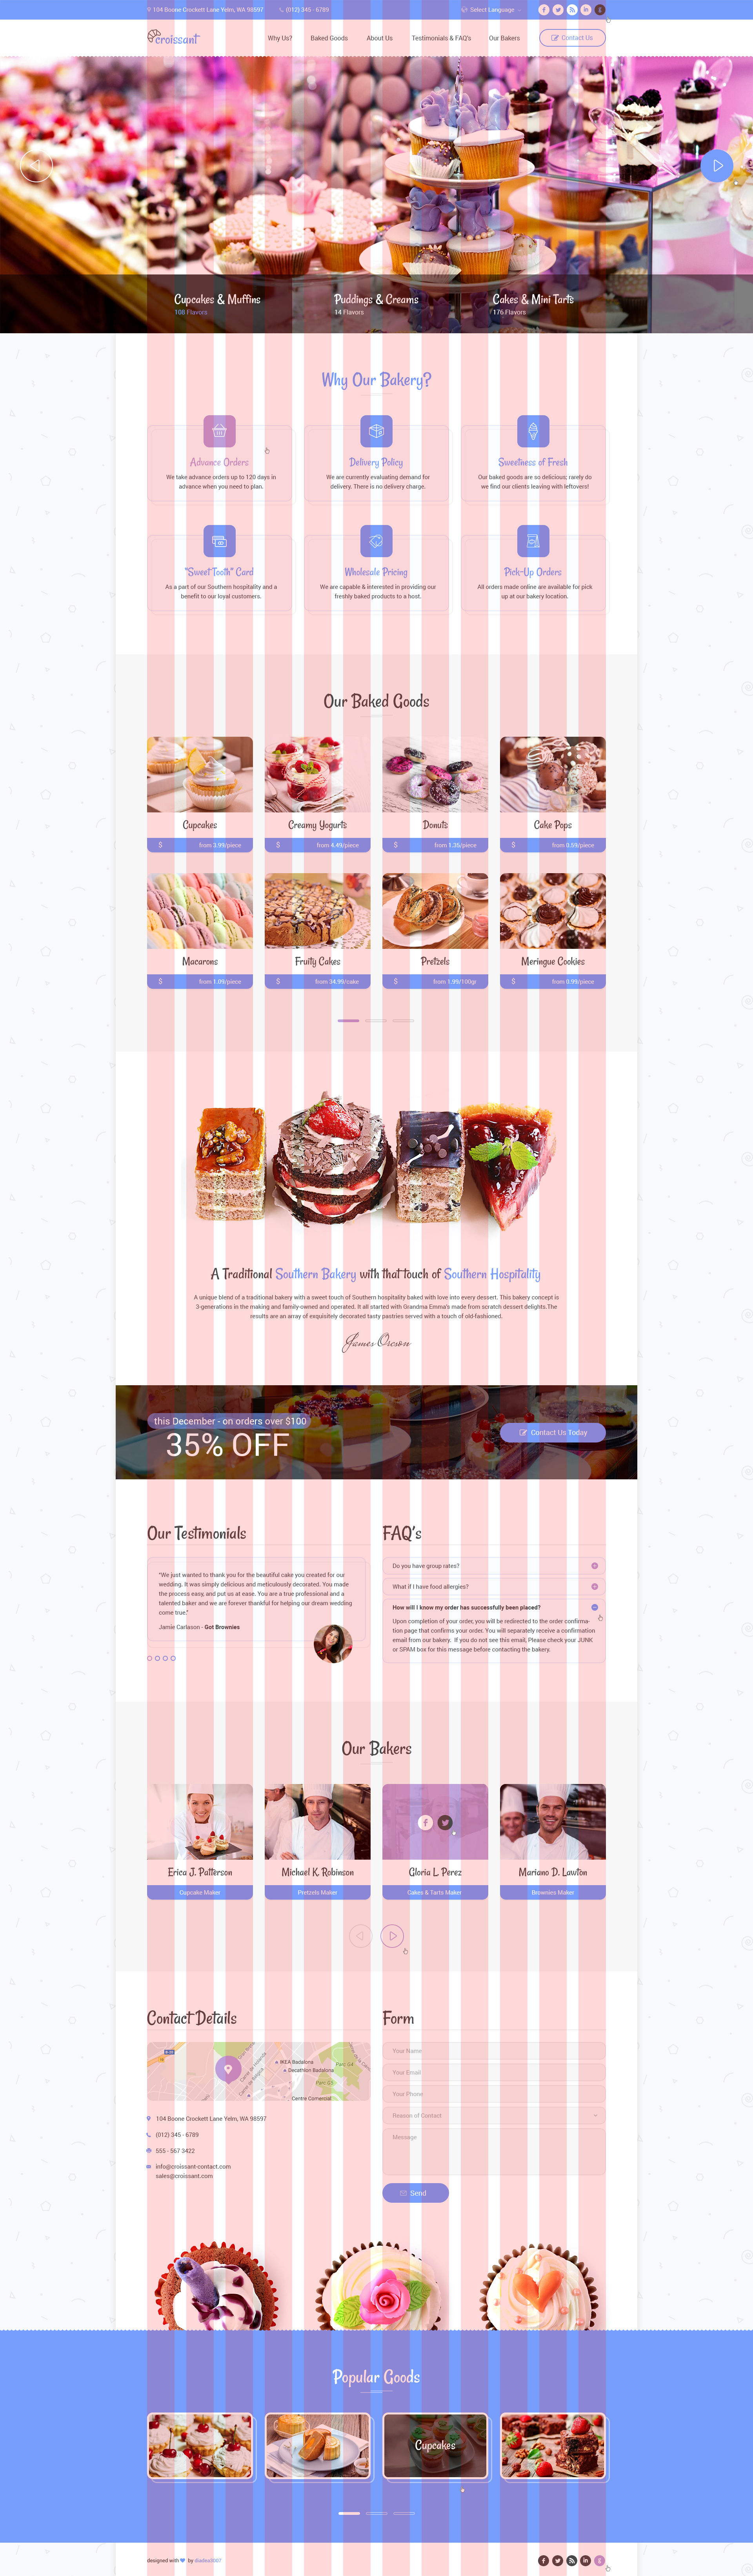 Croissant - Creative Bakery and Pastry Business One Page PSD Template